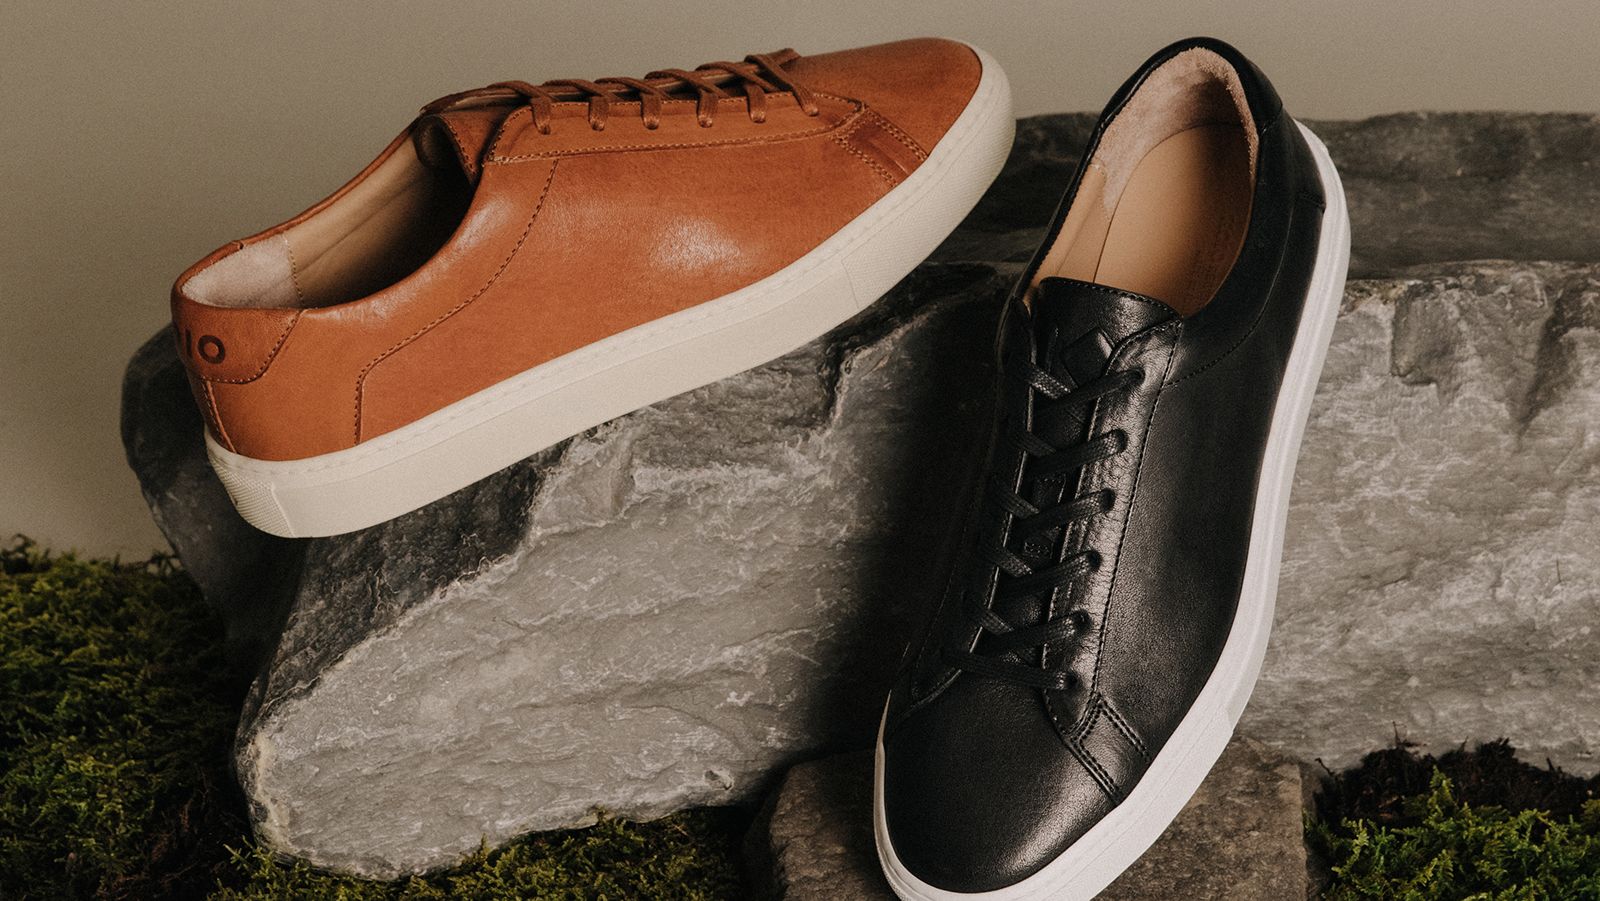 Koio just launched the world’s first fully regenerative luxury sneaker | CNN Underscored